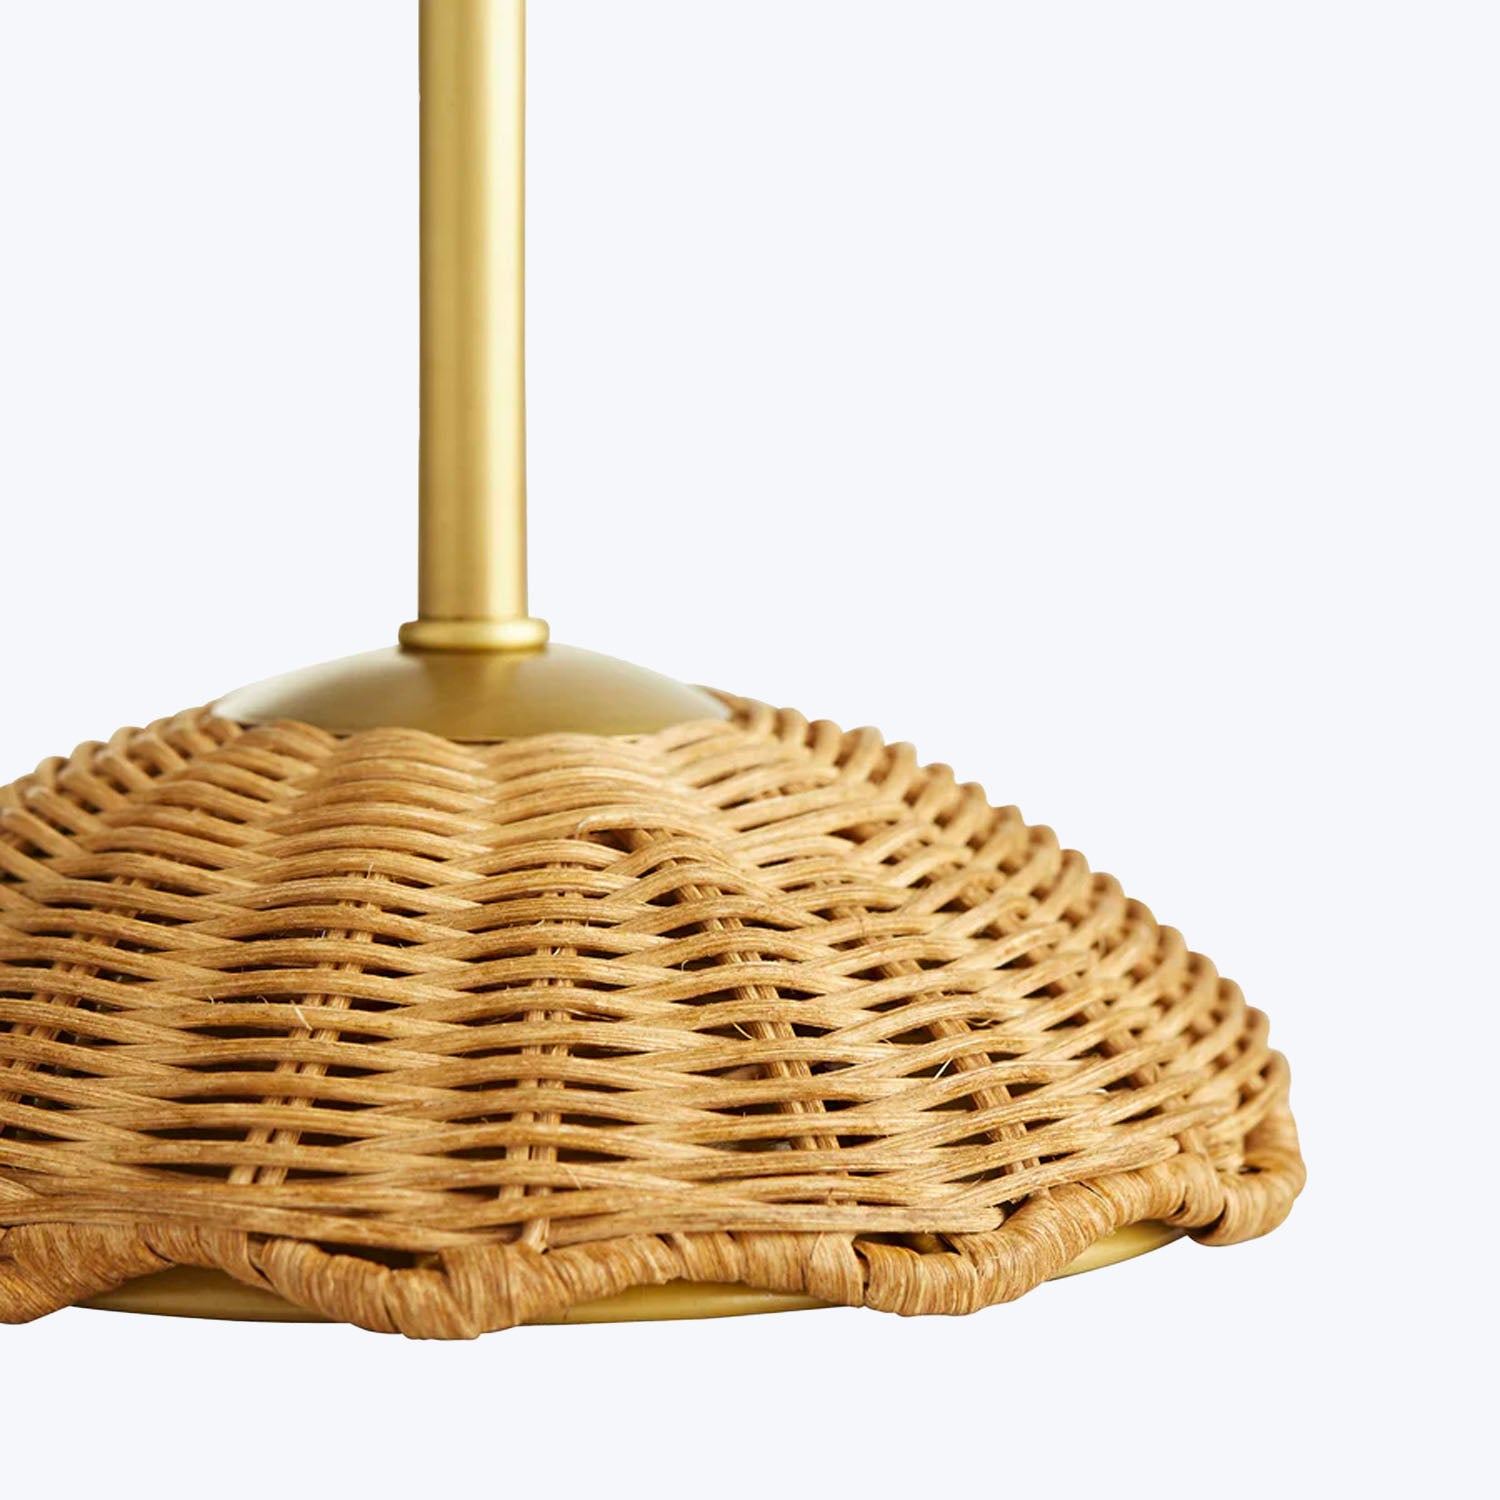 Close-up view of a wicker pendant lamp with intricate dome-like pattern.